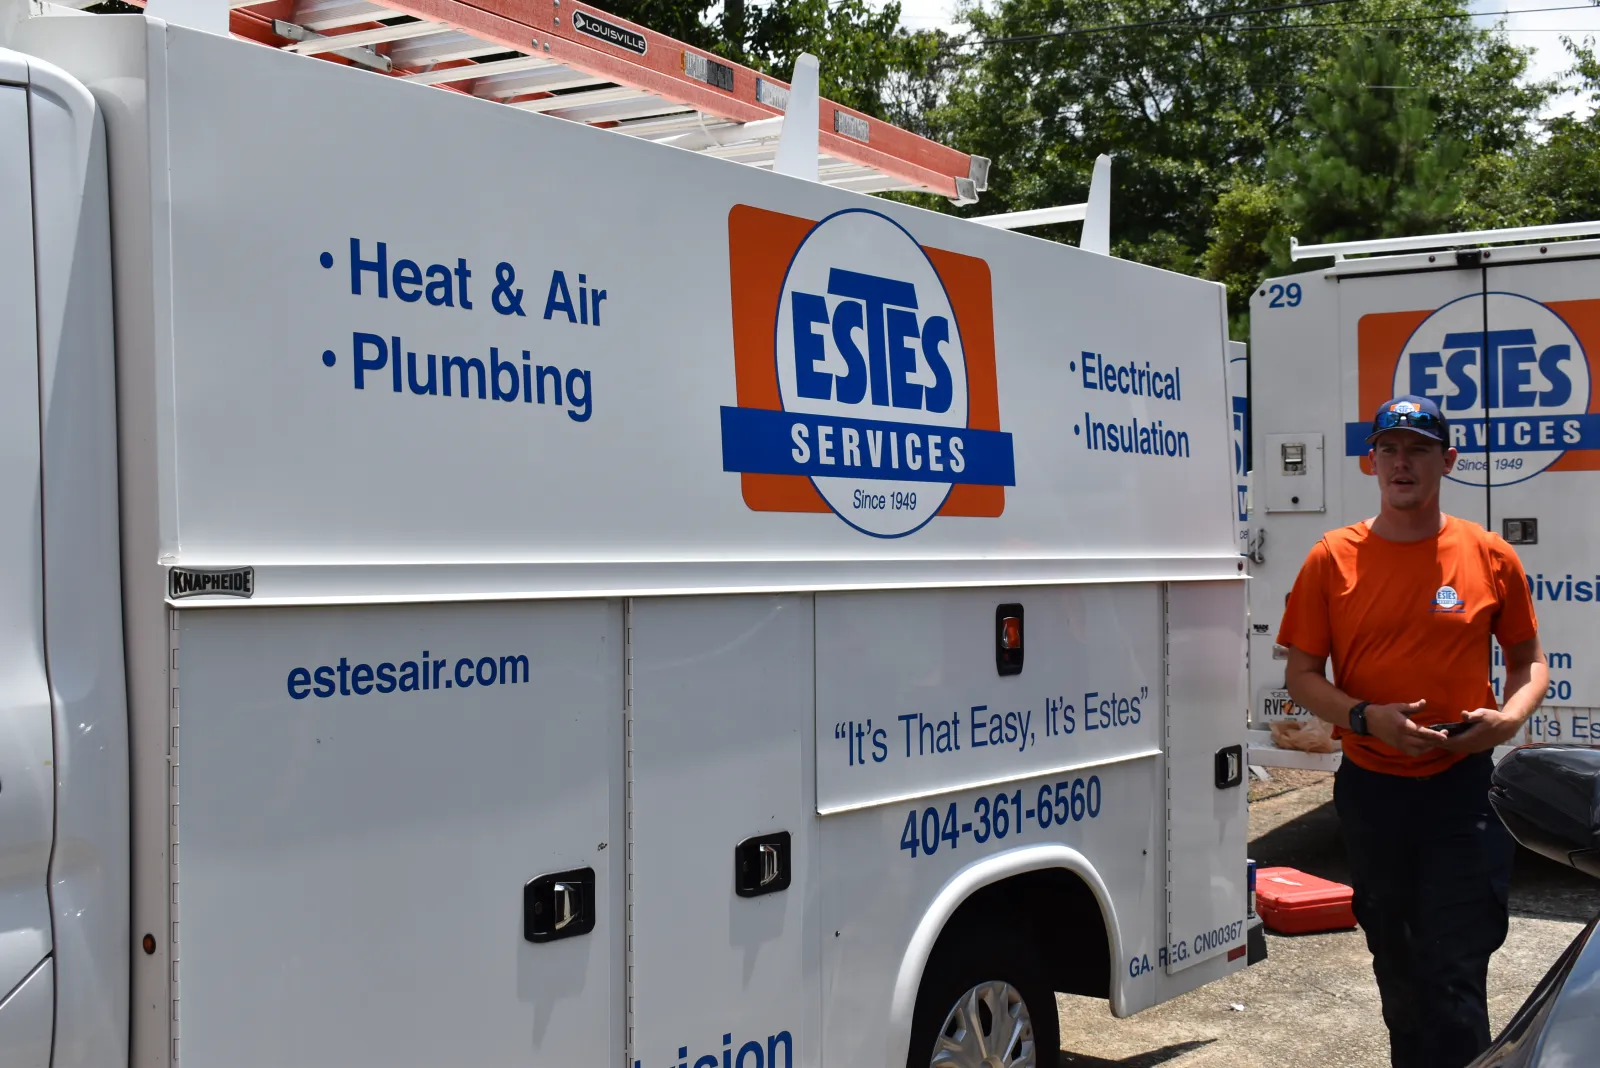 Make repipiing a New Years Resolution with Estes Plumbing Services